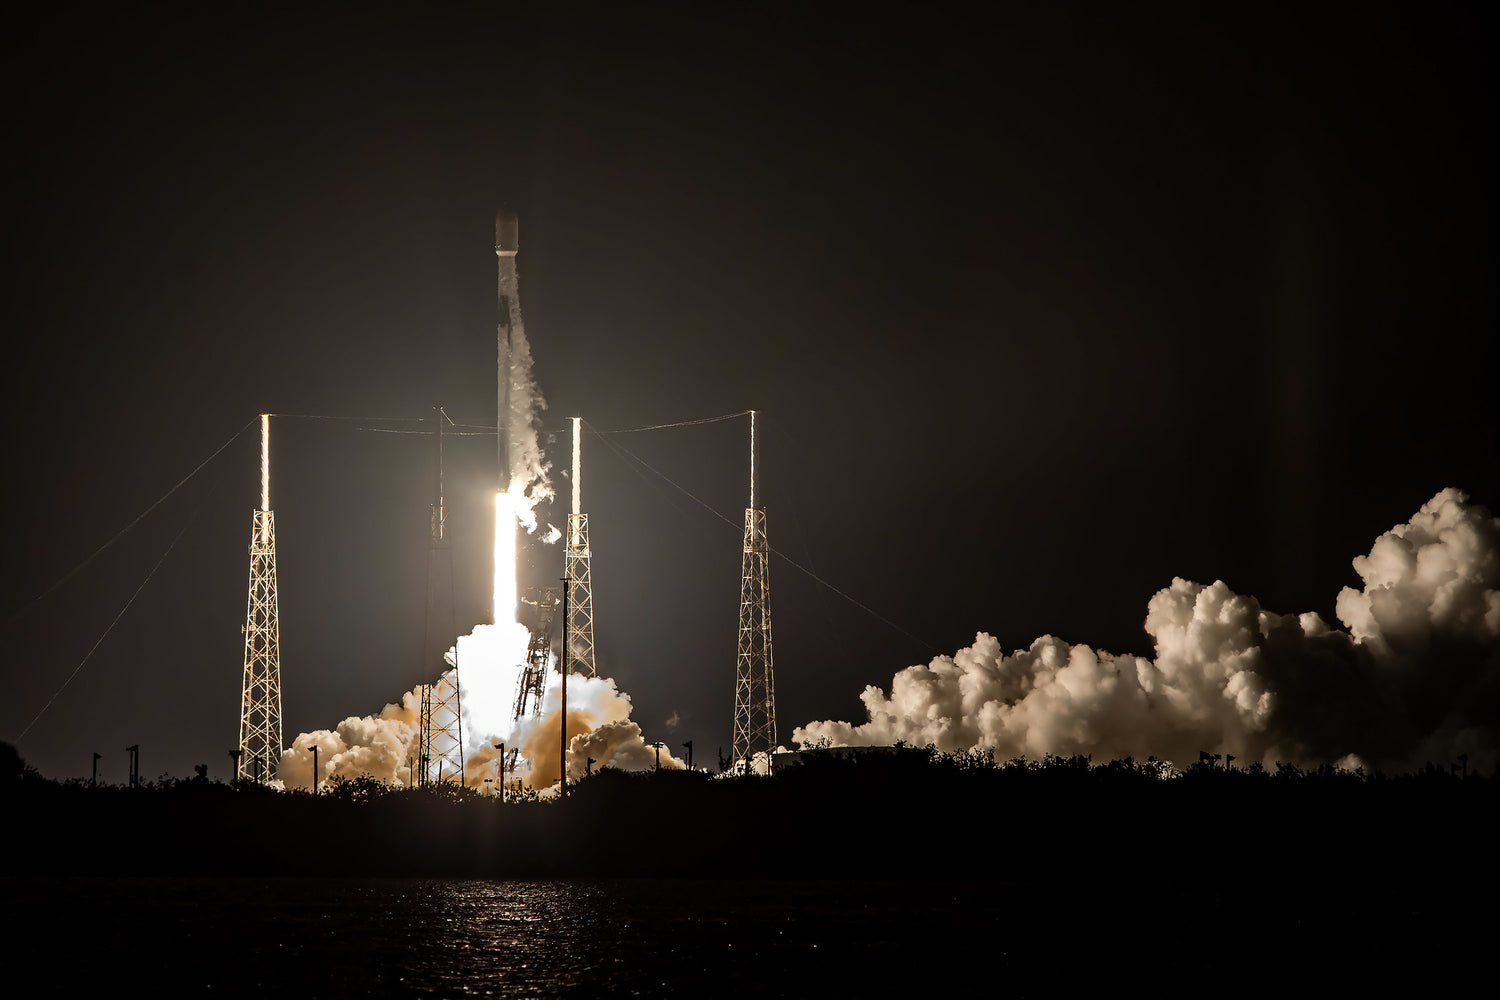 SpaceX Falcon 9 launches 12th time to deploy the heaviest payload of Starlink satellites